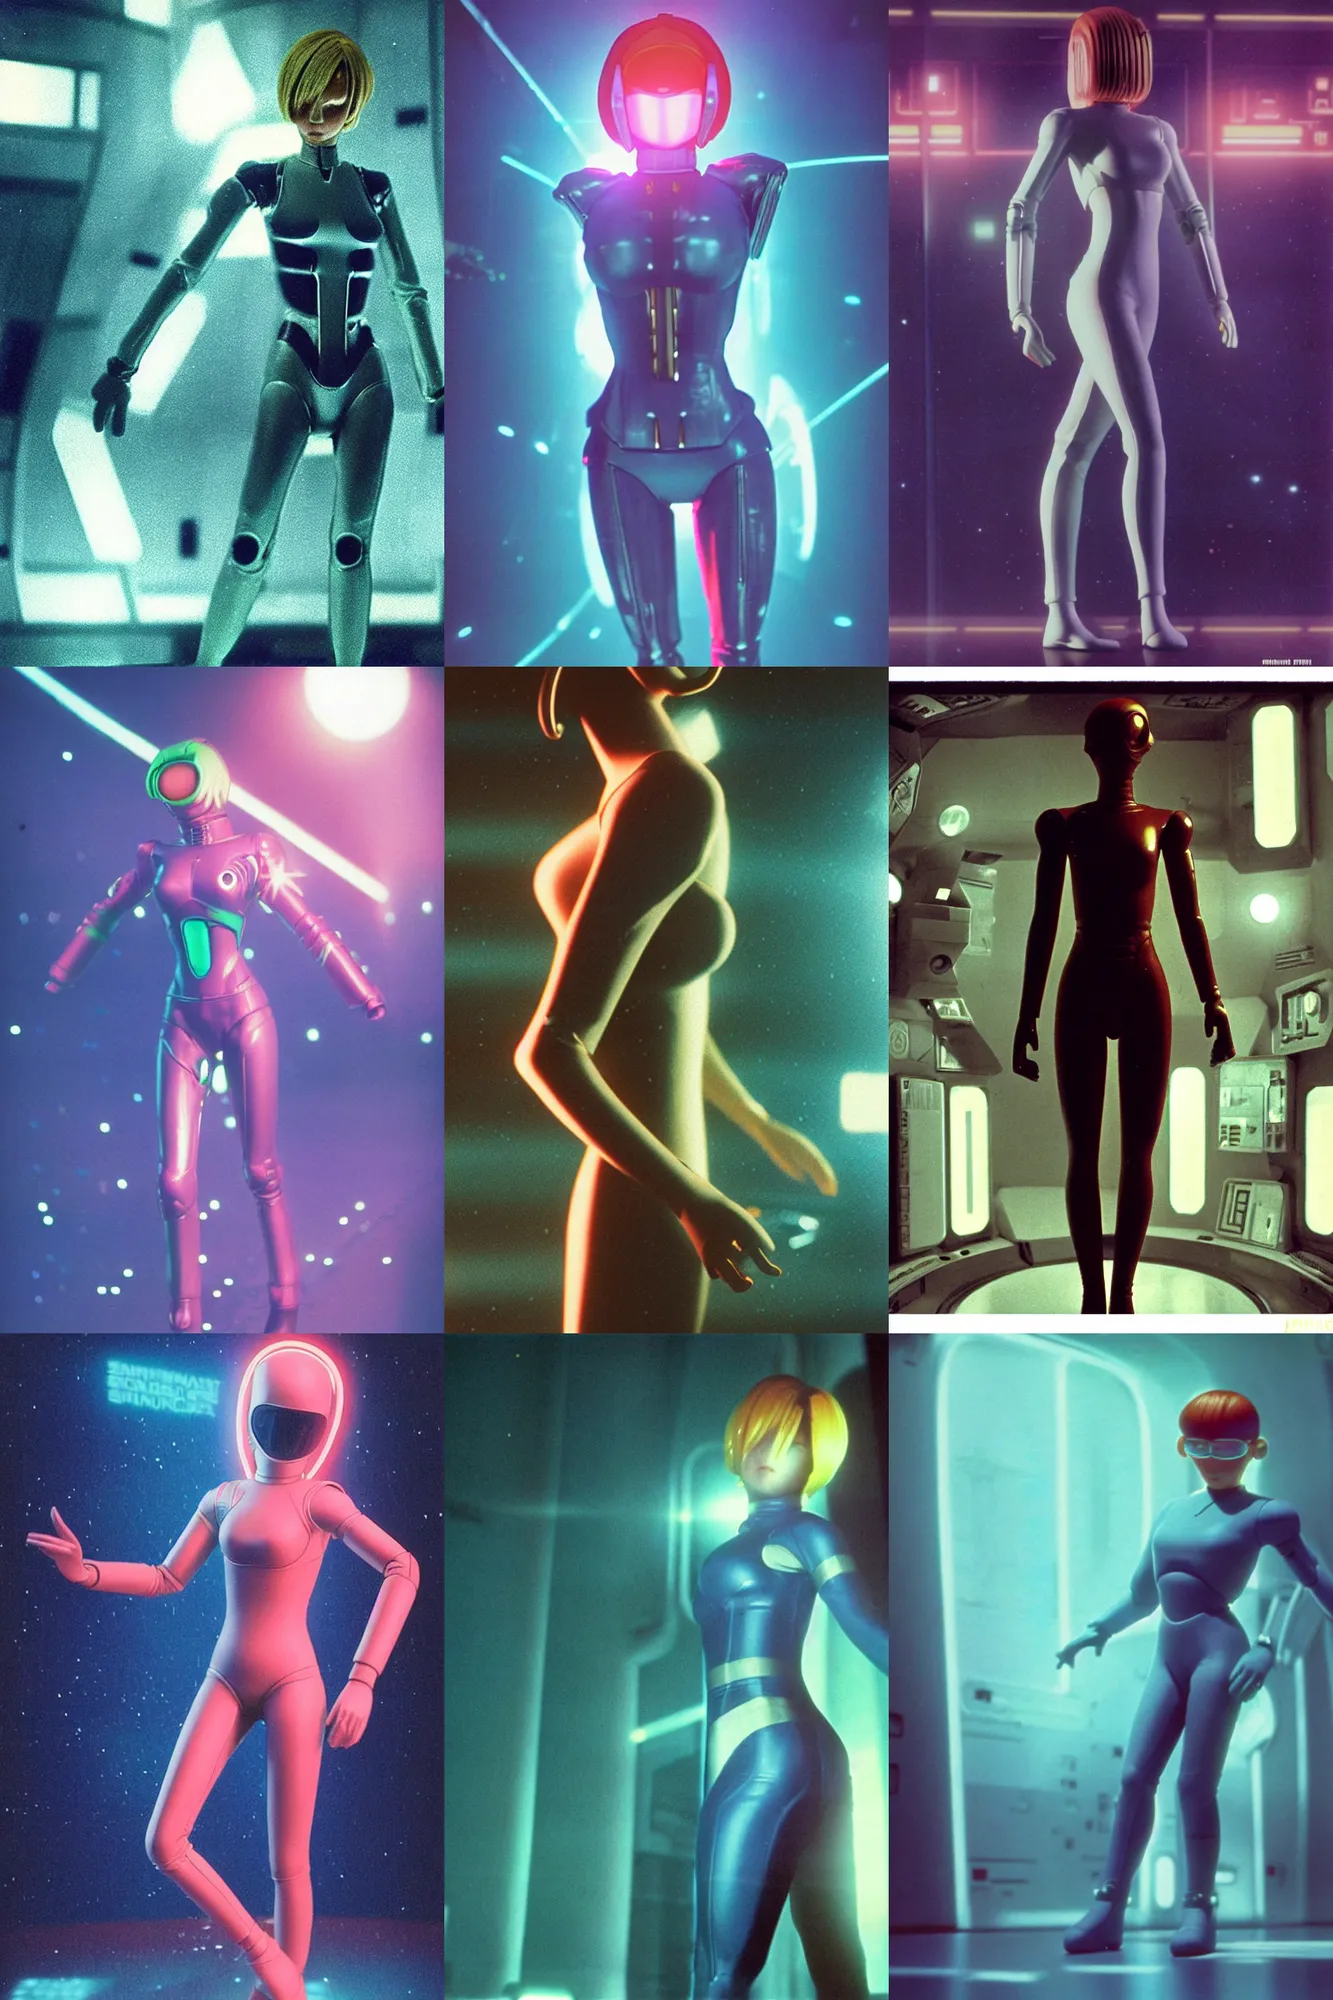 Prompt: Cinestill 50d, 8K, 35mm,J.J Abrams flare; beautiful ultra realistic vaporwave minimalistic pointé posed seinen manga samus suit aran in space(1950) film still medical lab dance scene, 2000s frontiers in blade runner retrofuturism fashion magazine September hyperrealism holly herndon edition, highly detailed, extreme closeup three-quarter pointé posed model portrait, tilt shift zaha hadid background, three point perspective: focus on anti-g flight suit;pointé pose;open mouth,terrified, eye contact, soft lighting